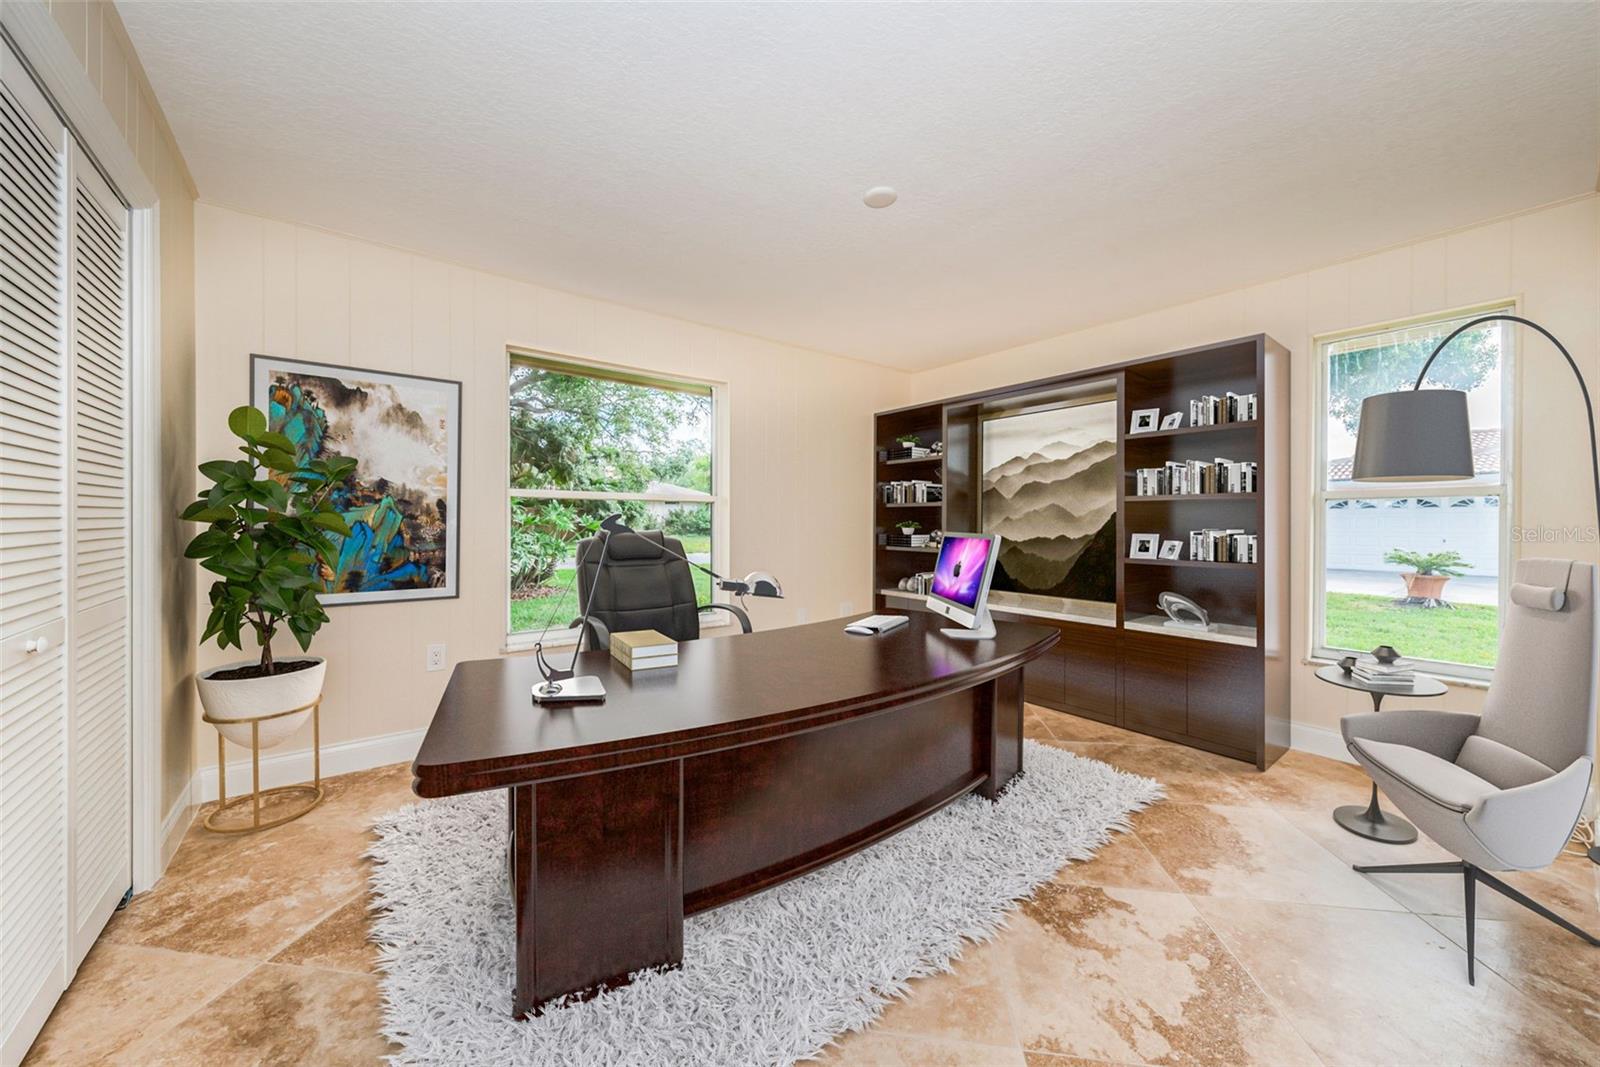 Fourth bedroom or perfect home office or nursery!